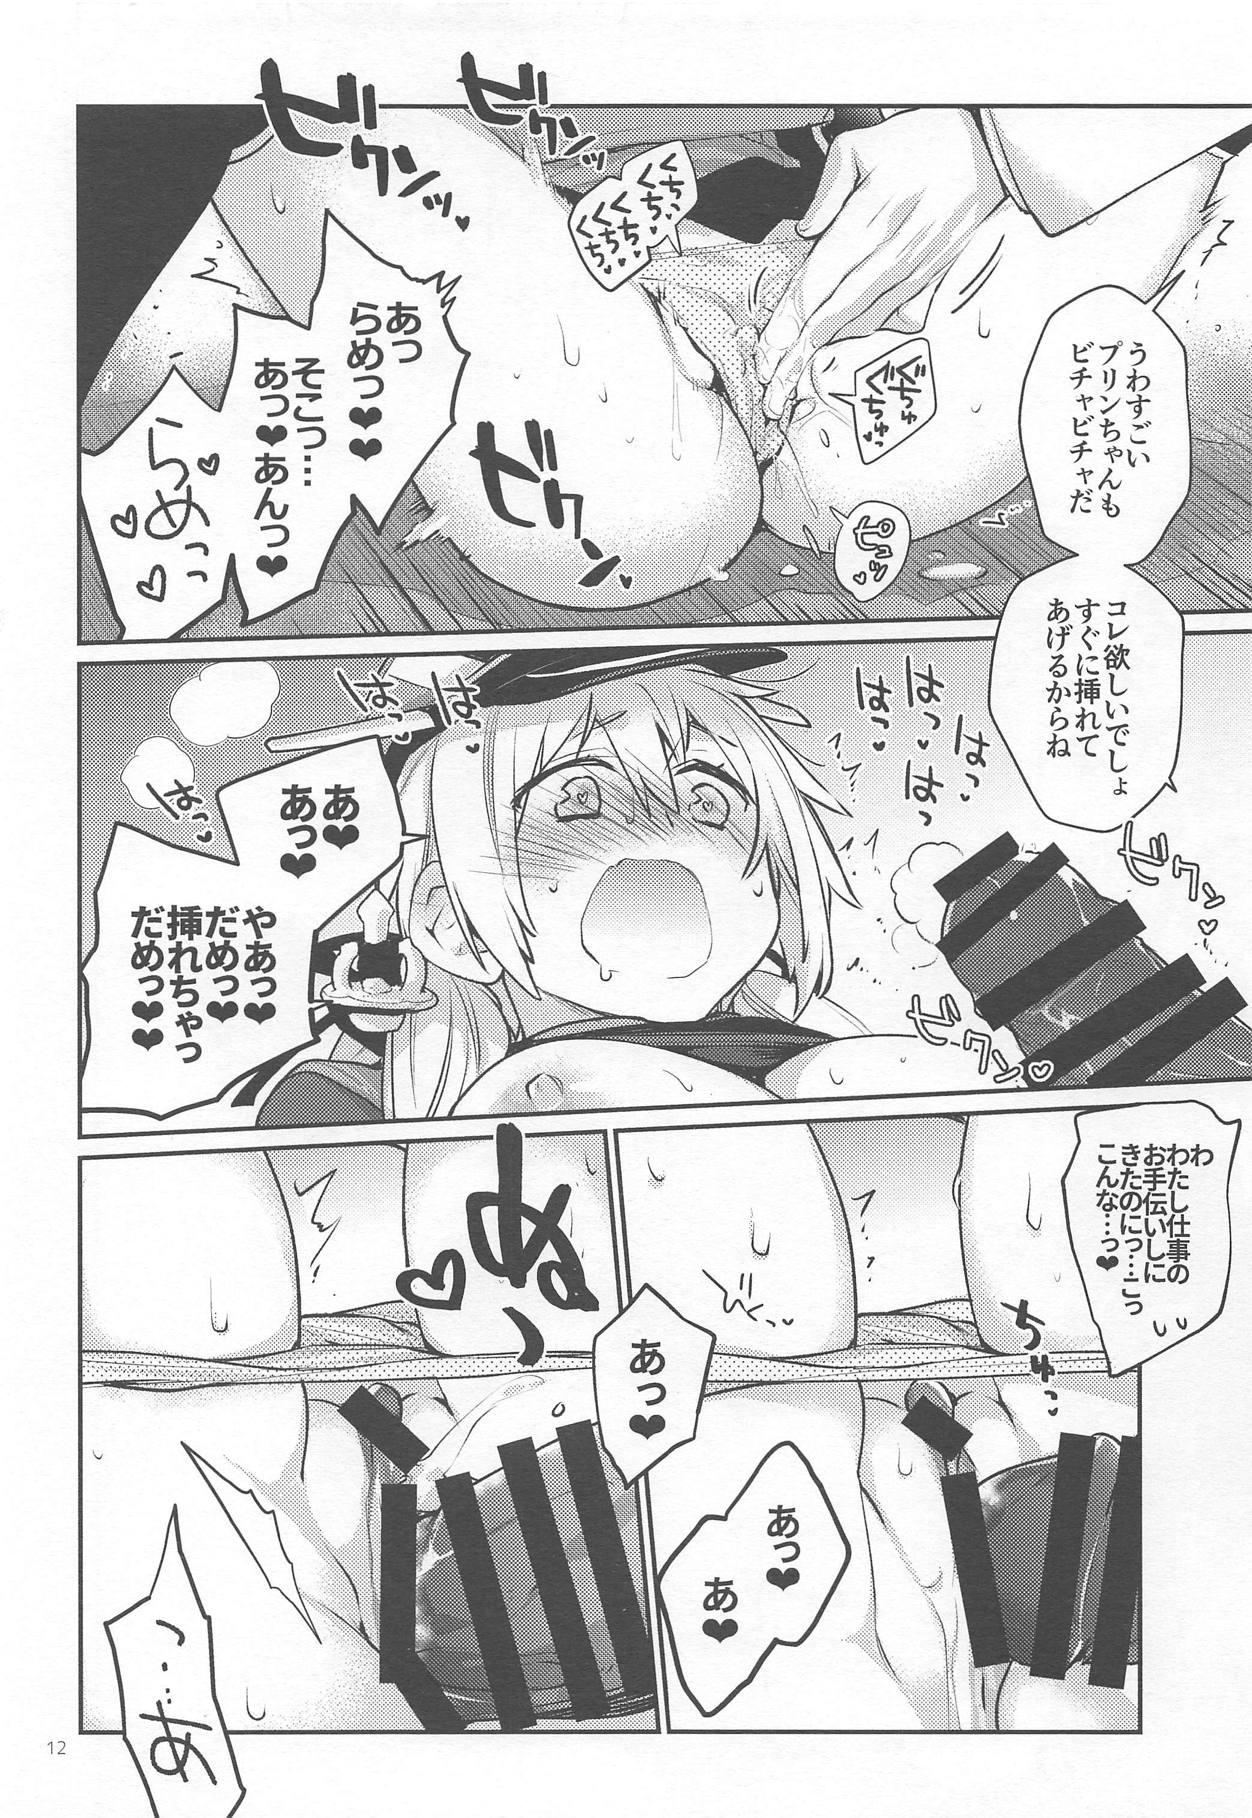 Muscles Prinz Pudding 5 - Kantai collection Butts - Page 11